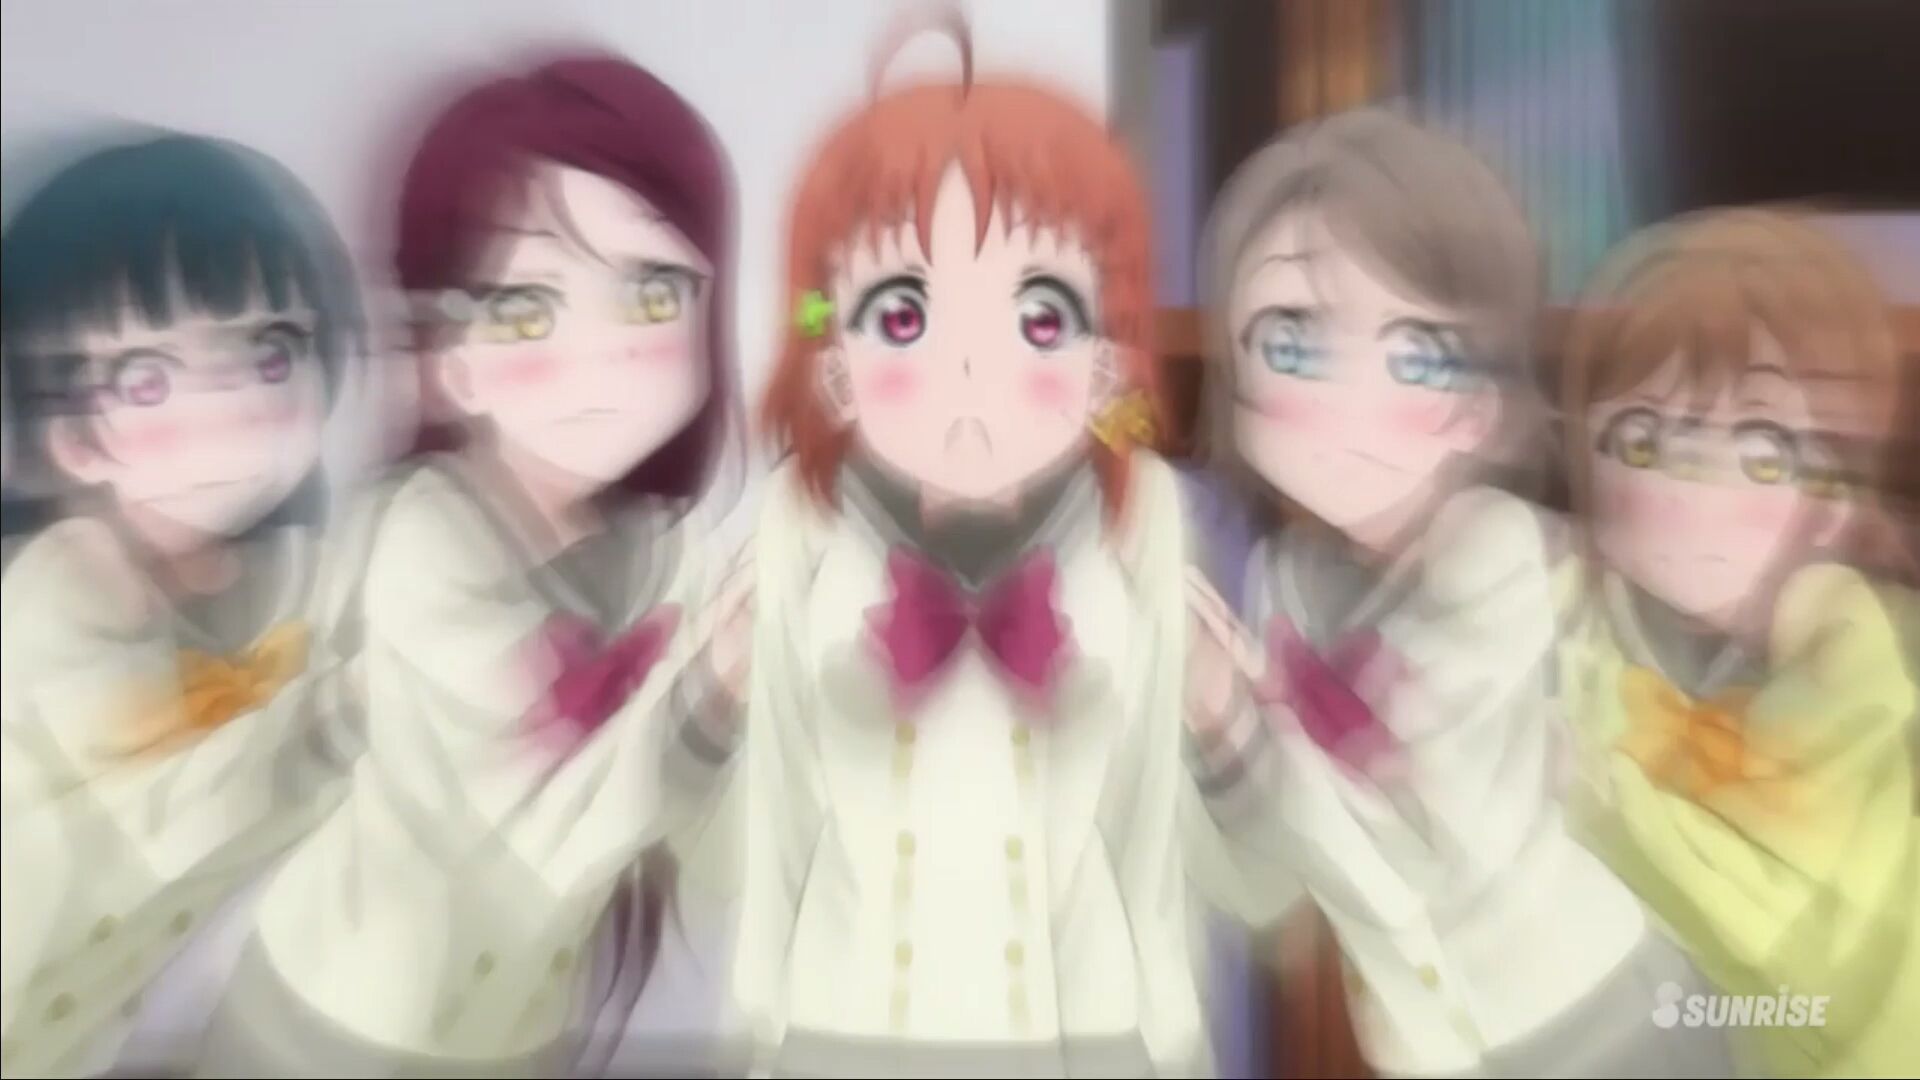 [Image] "love live! Sunshine "1000 songs she bend was its cute scene image competitions wwwwwwwwww 32